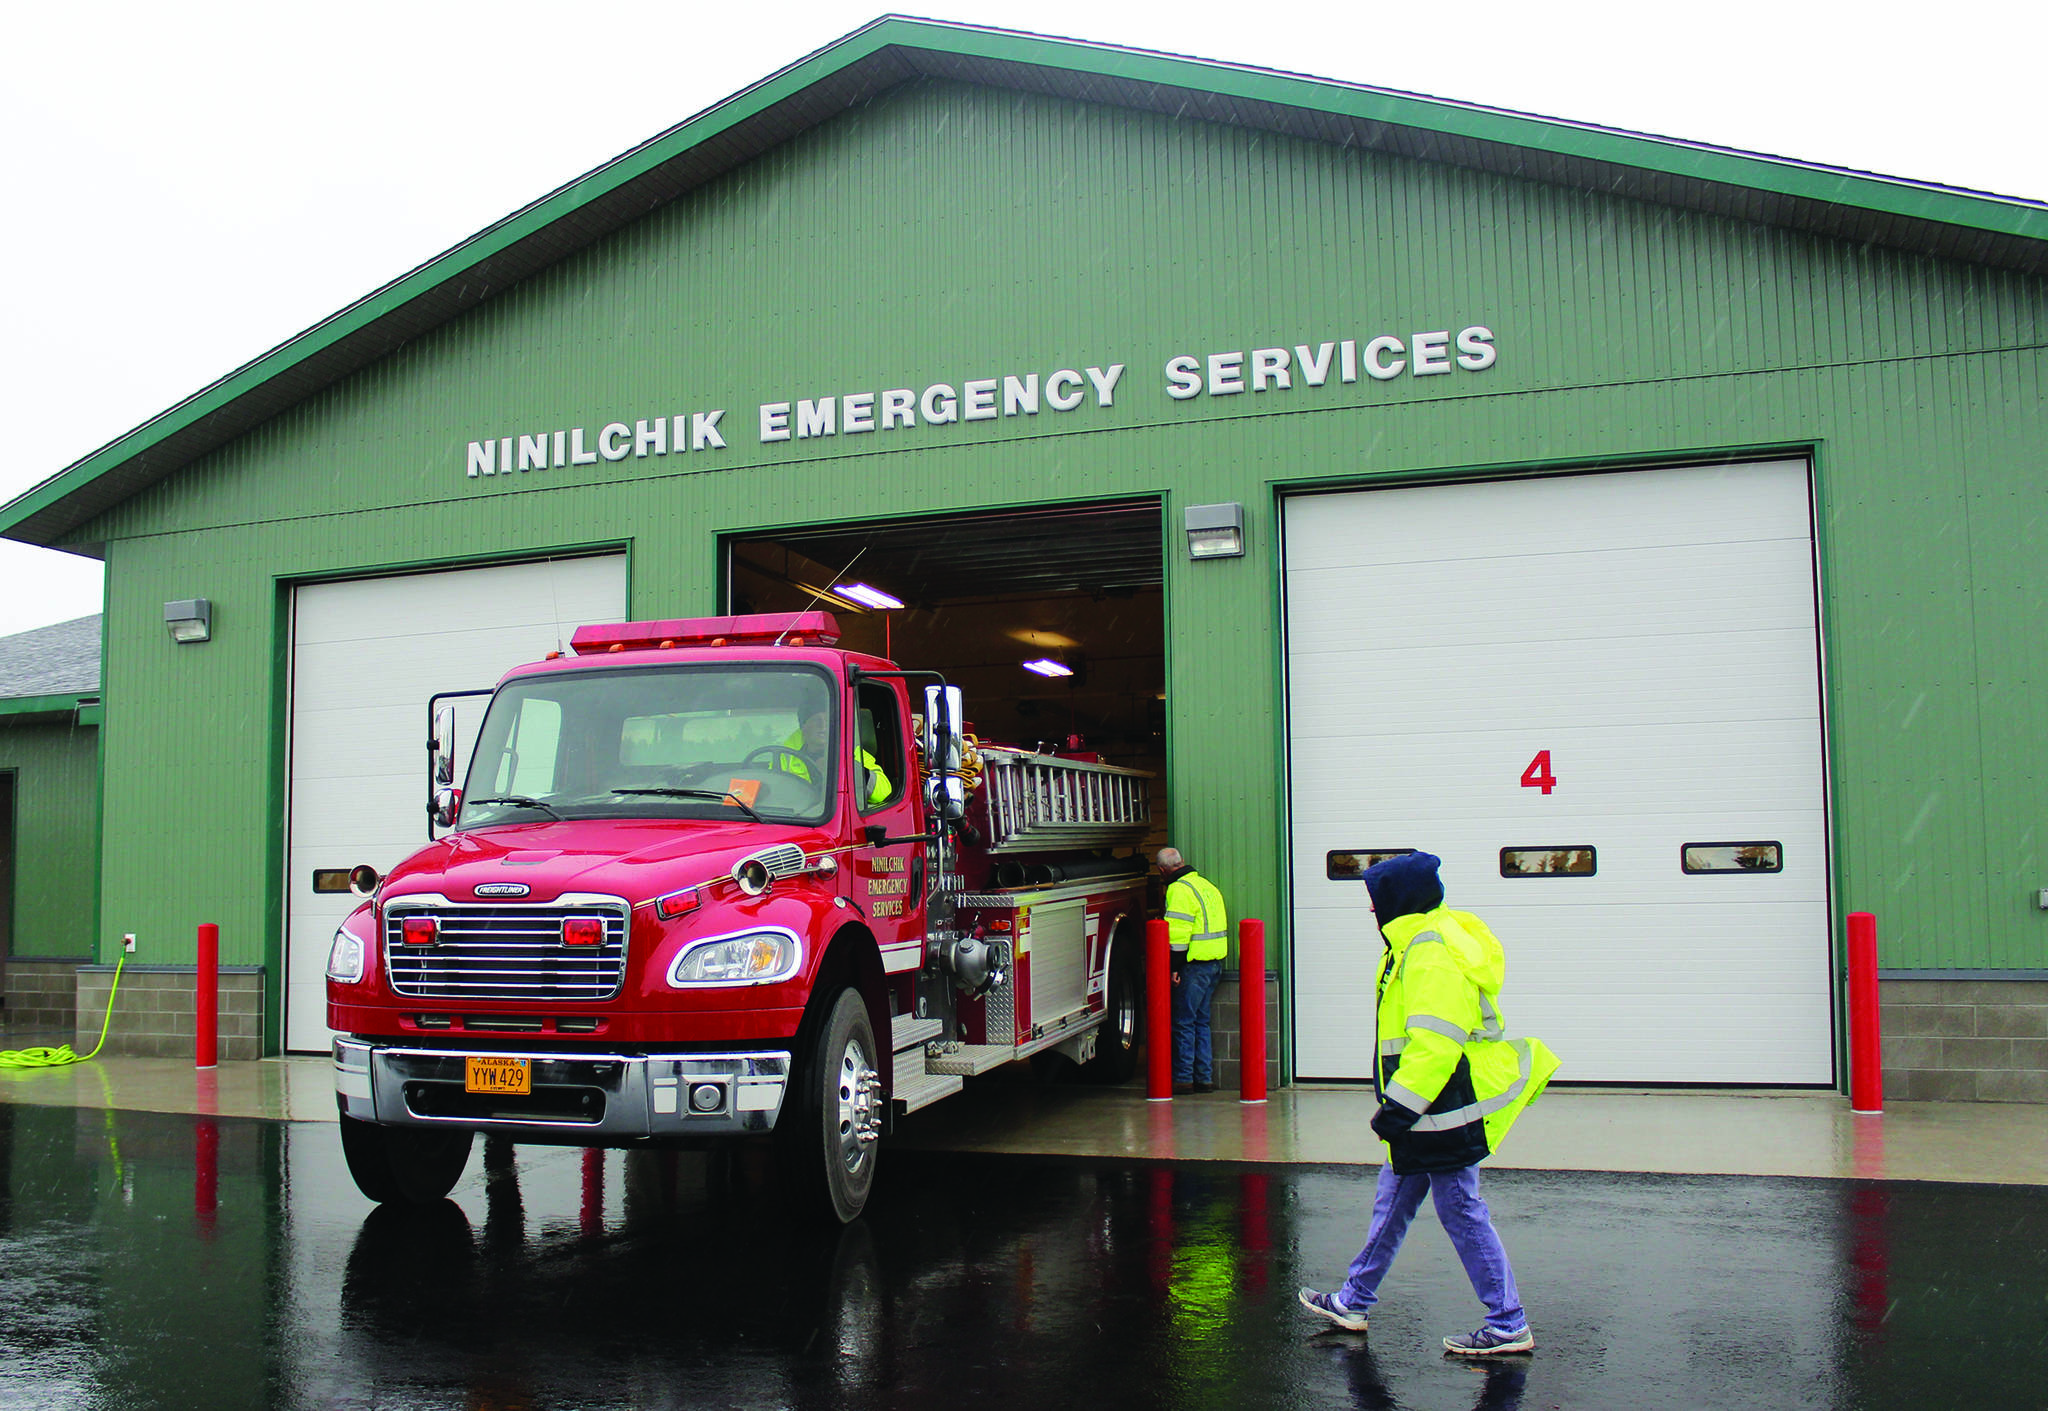 Borough gathers feedback on plan for combined fire, emergency medical service area